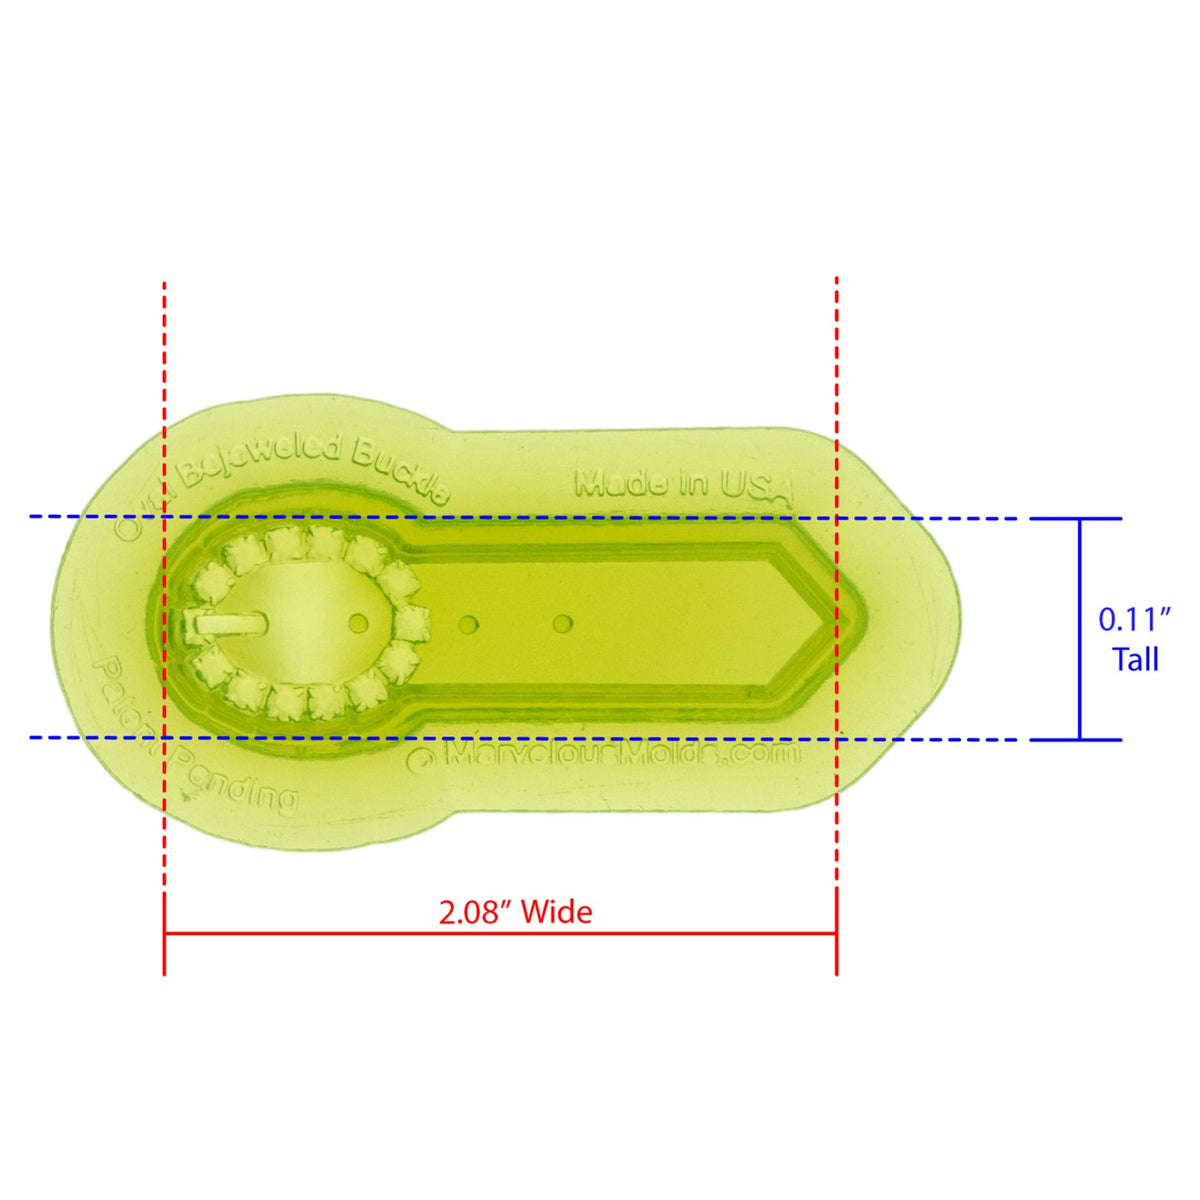 Oval Bejeweled Buckle Silicone Mold Cavity measures 2.08 inches Wide by .11 inches Tall, proudly Made in USA